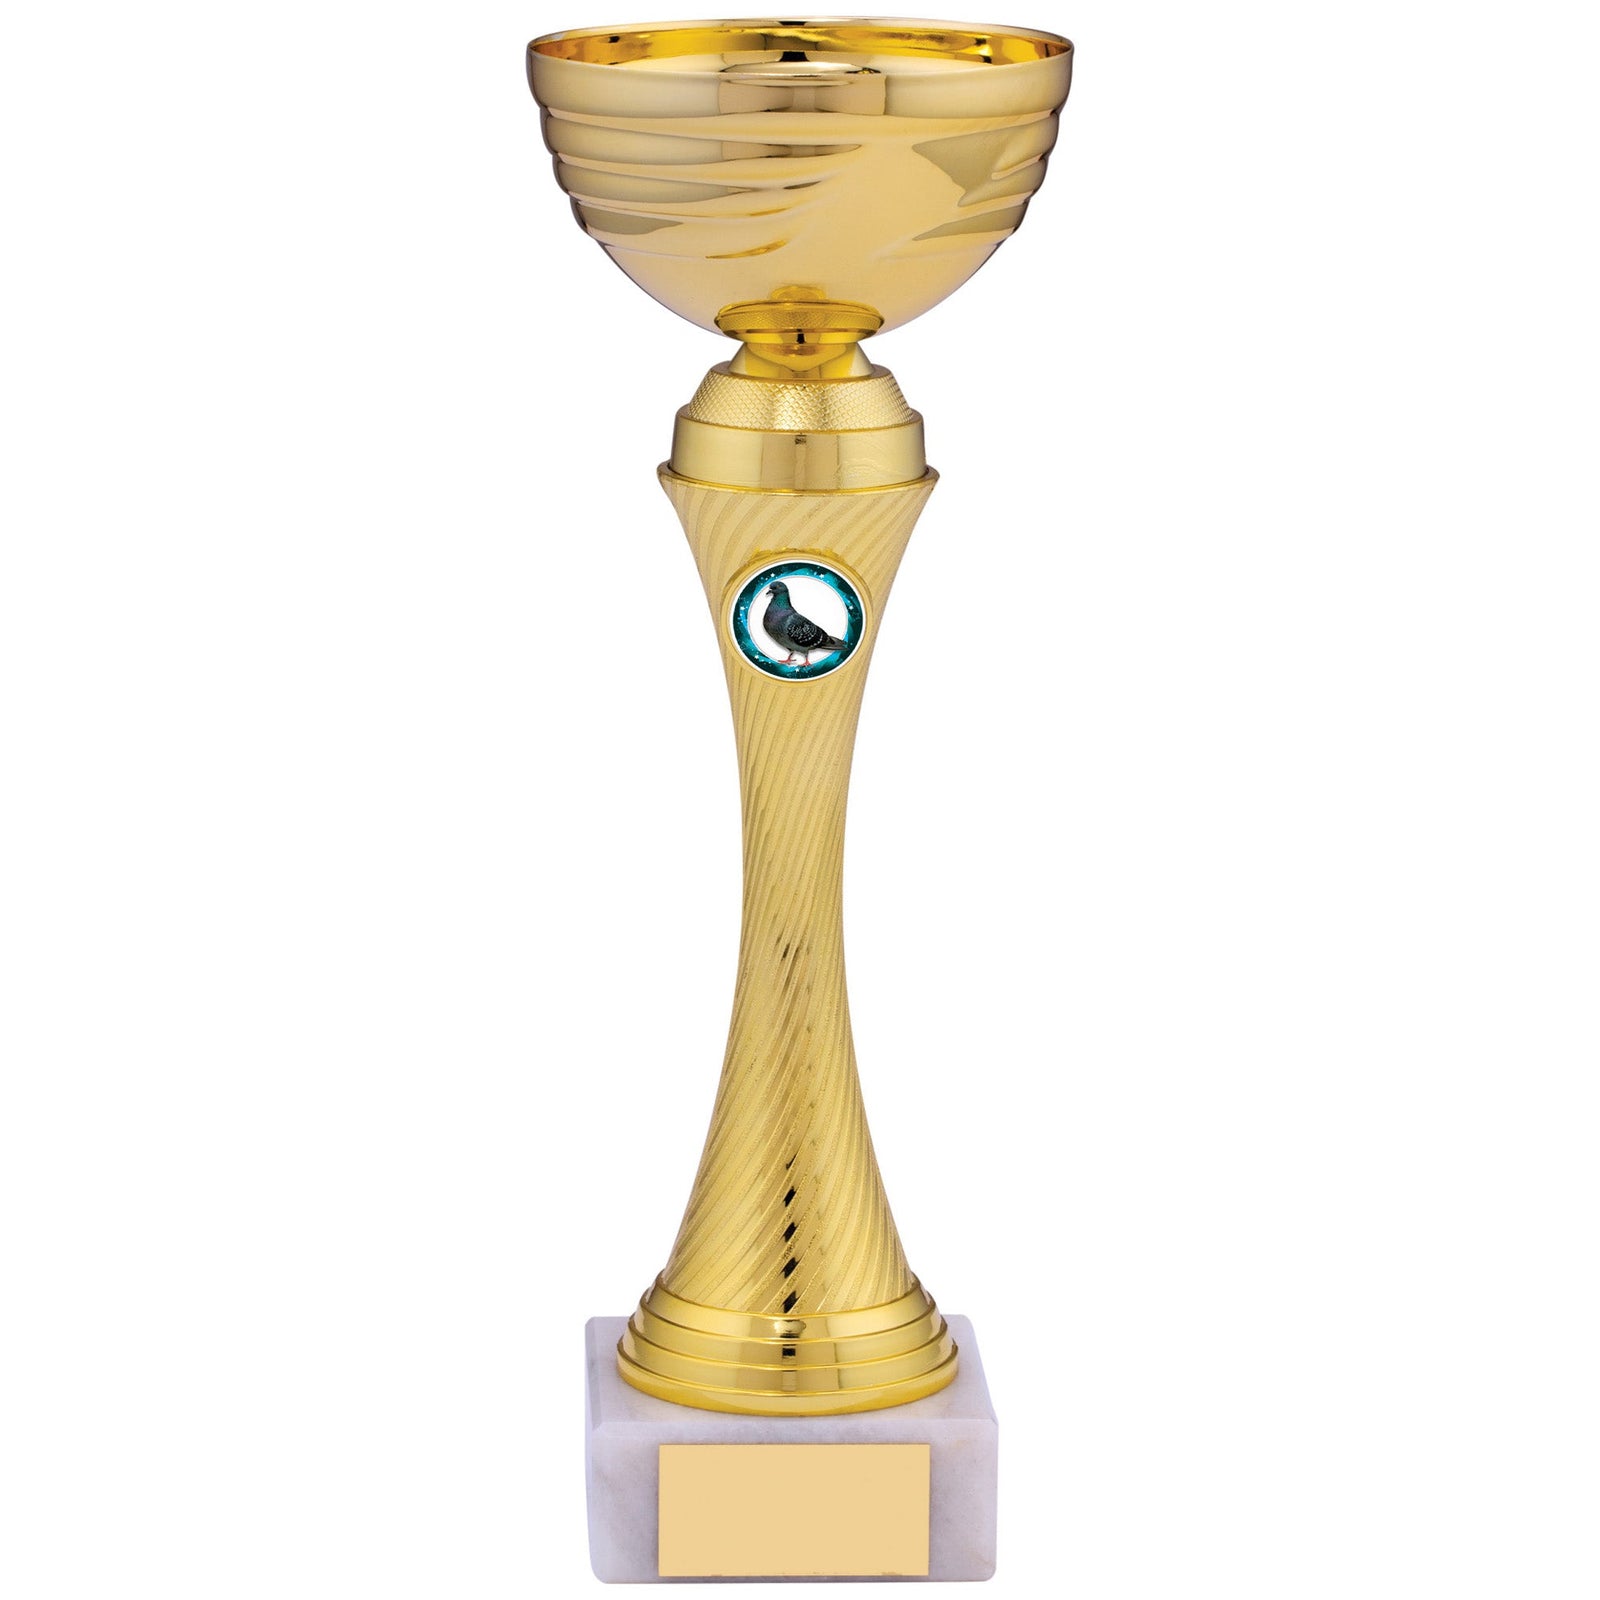 Gold Trophy Cup with Twist Pattern Stem